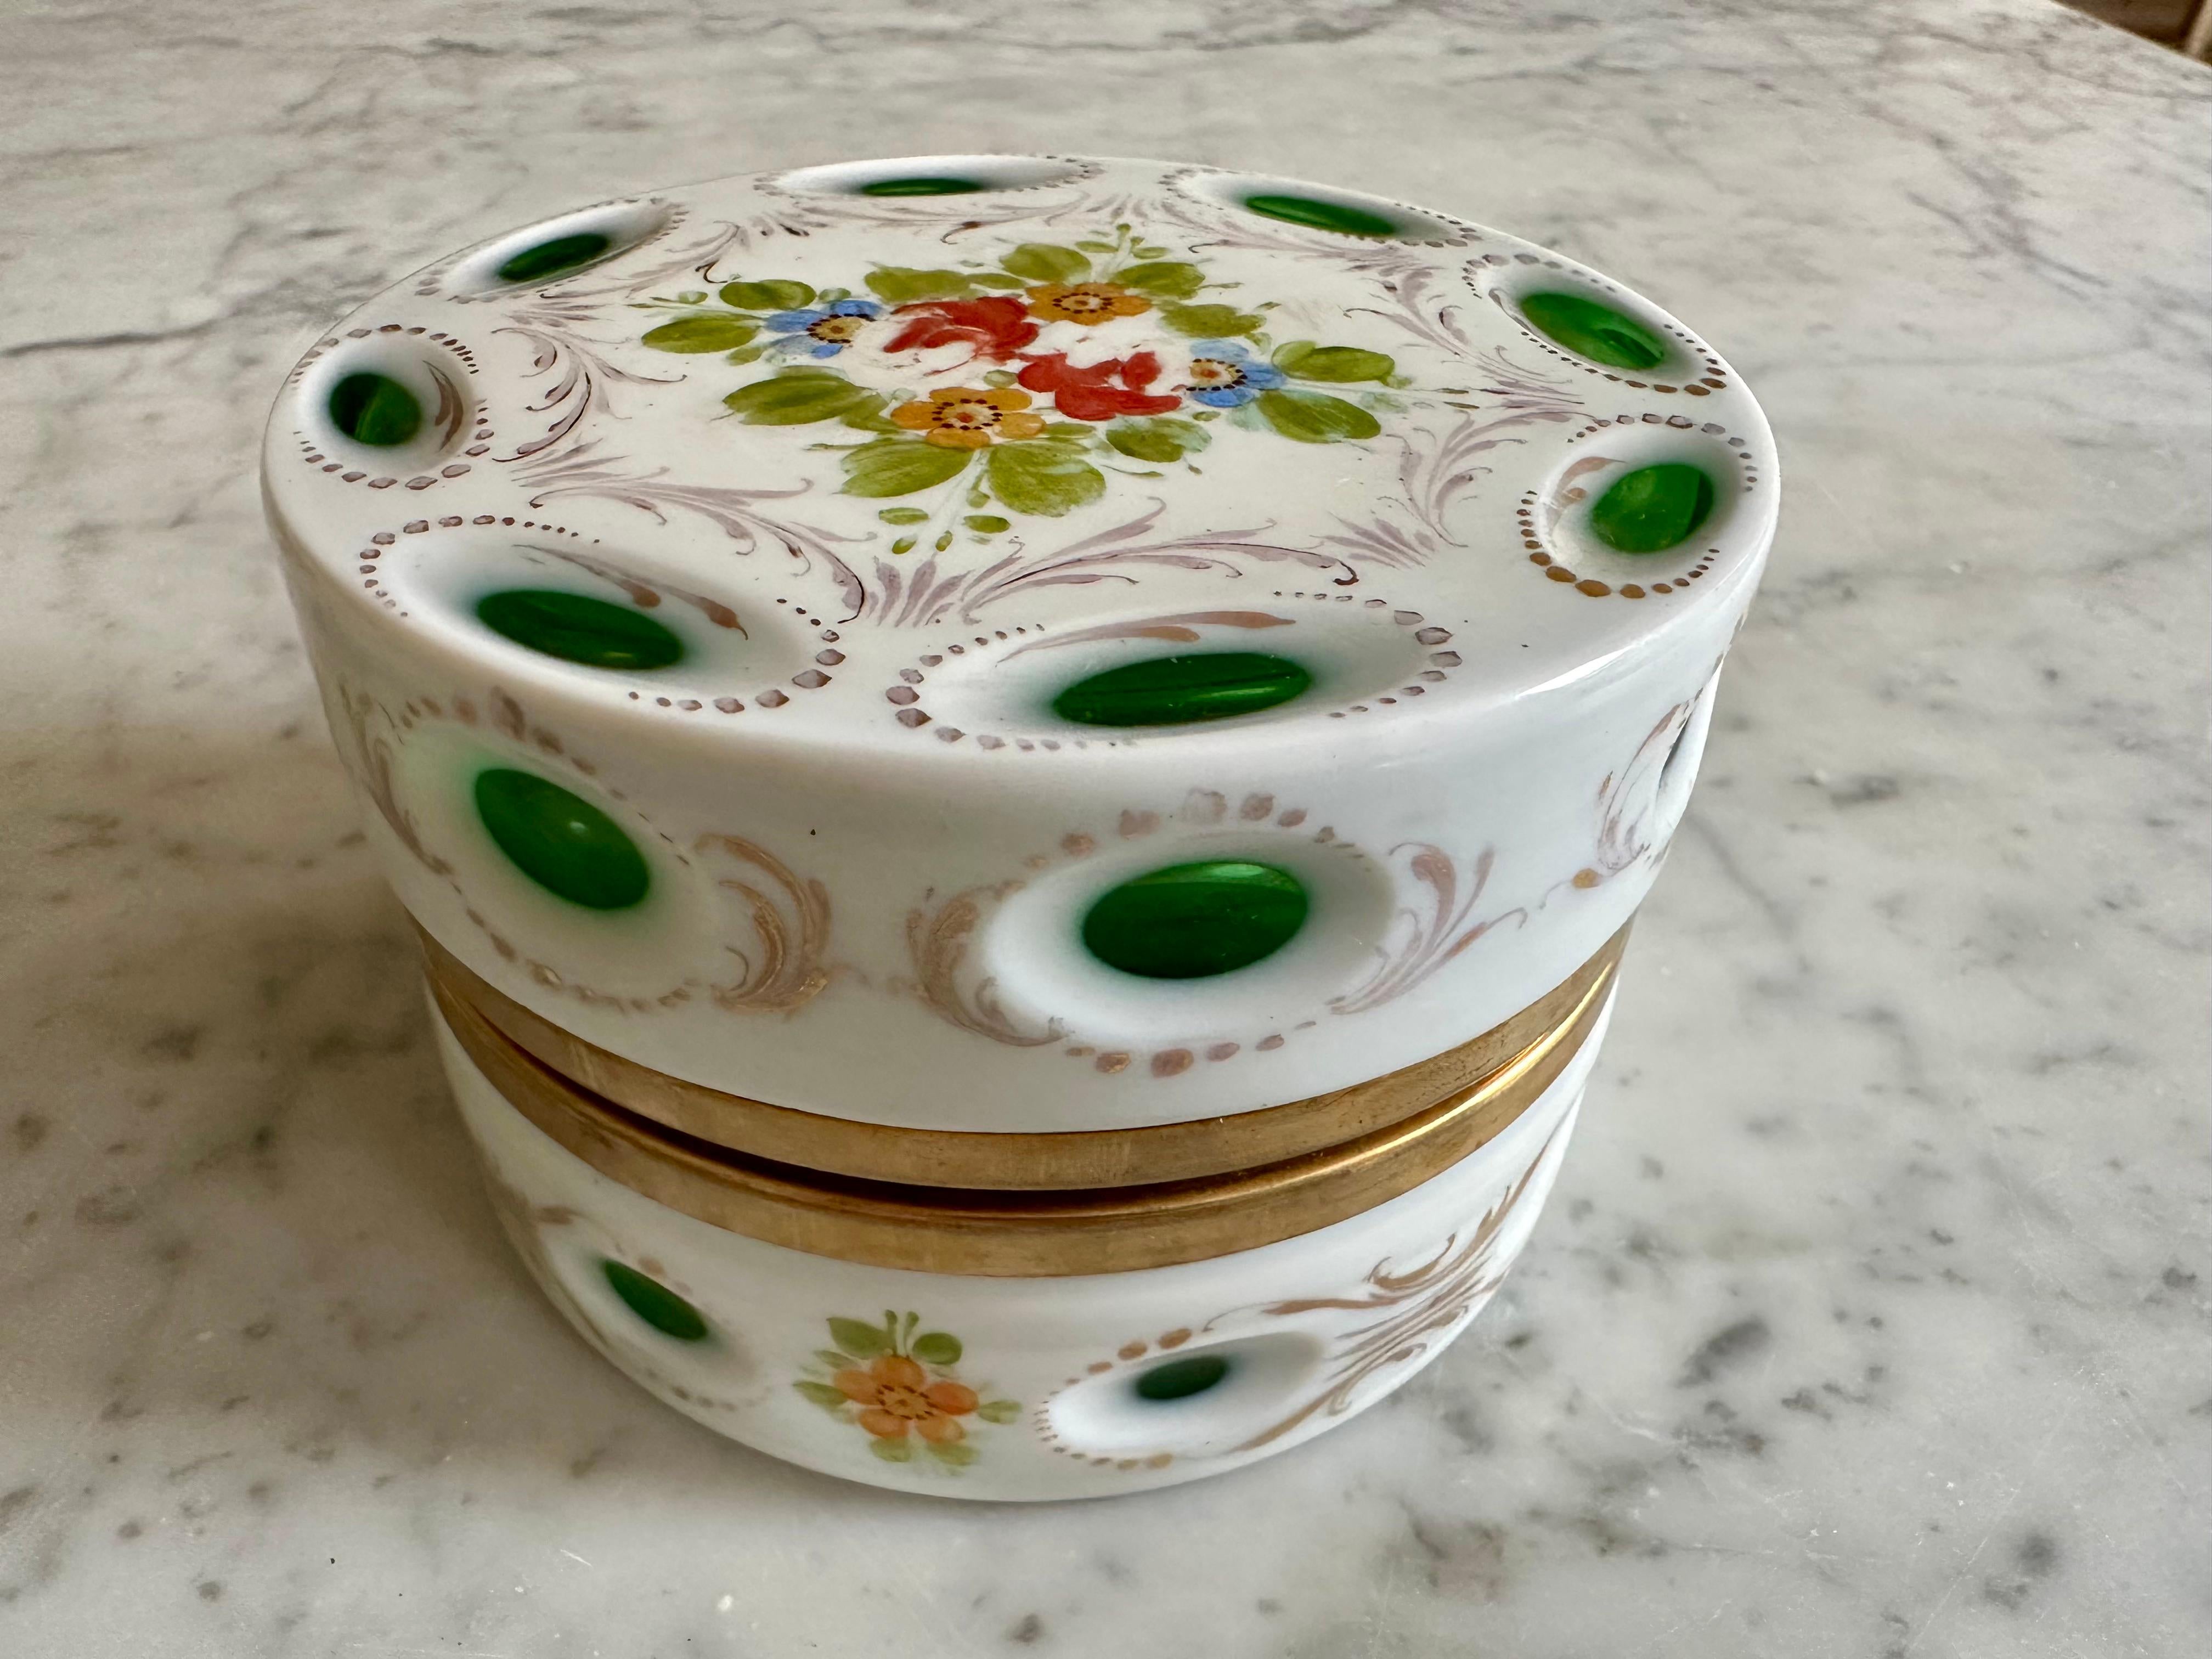 1890s Opaline Glass Lidded Box with Floral Ornament, white an green For Sale 11